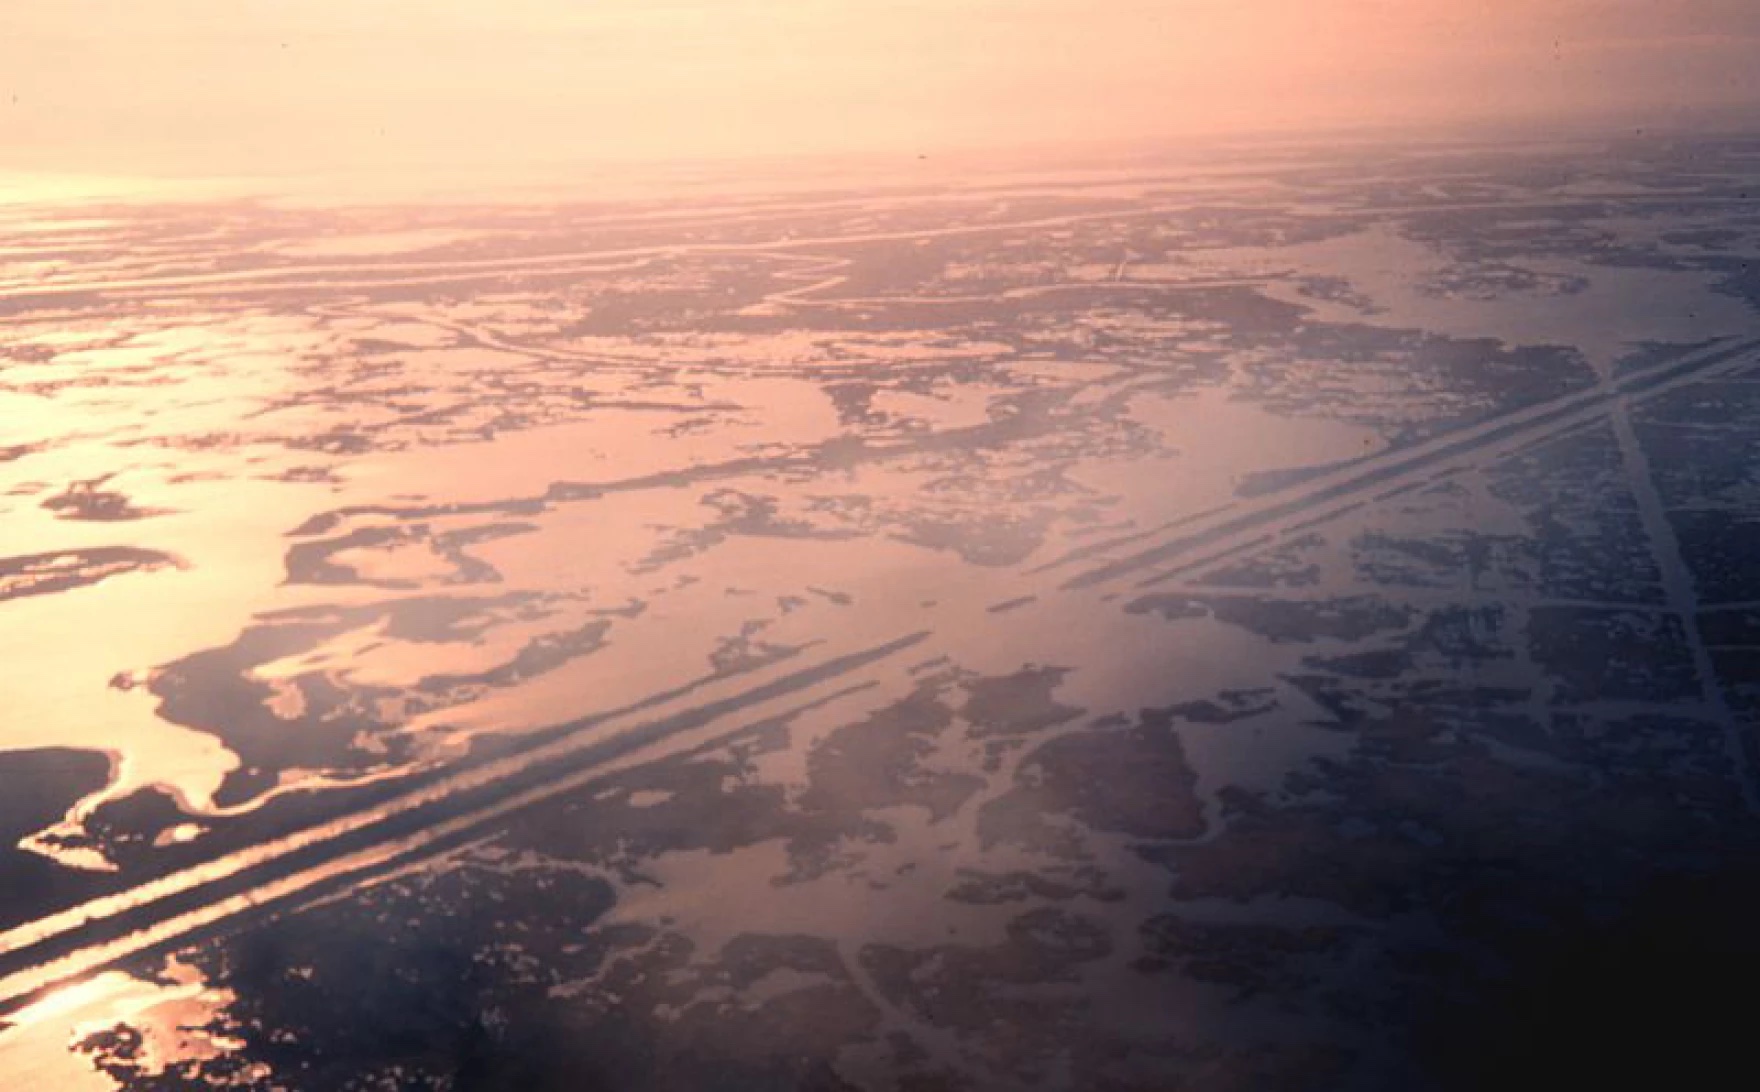 A bird's eye view of Mississippi river marshes